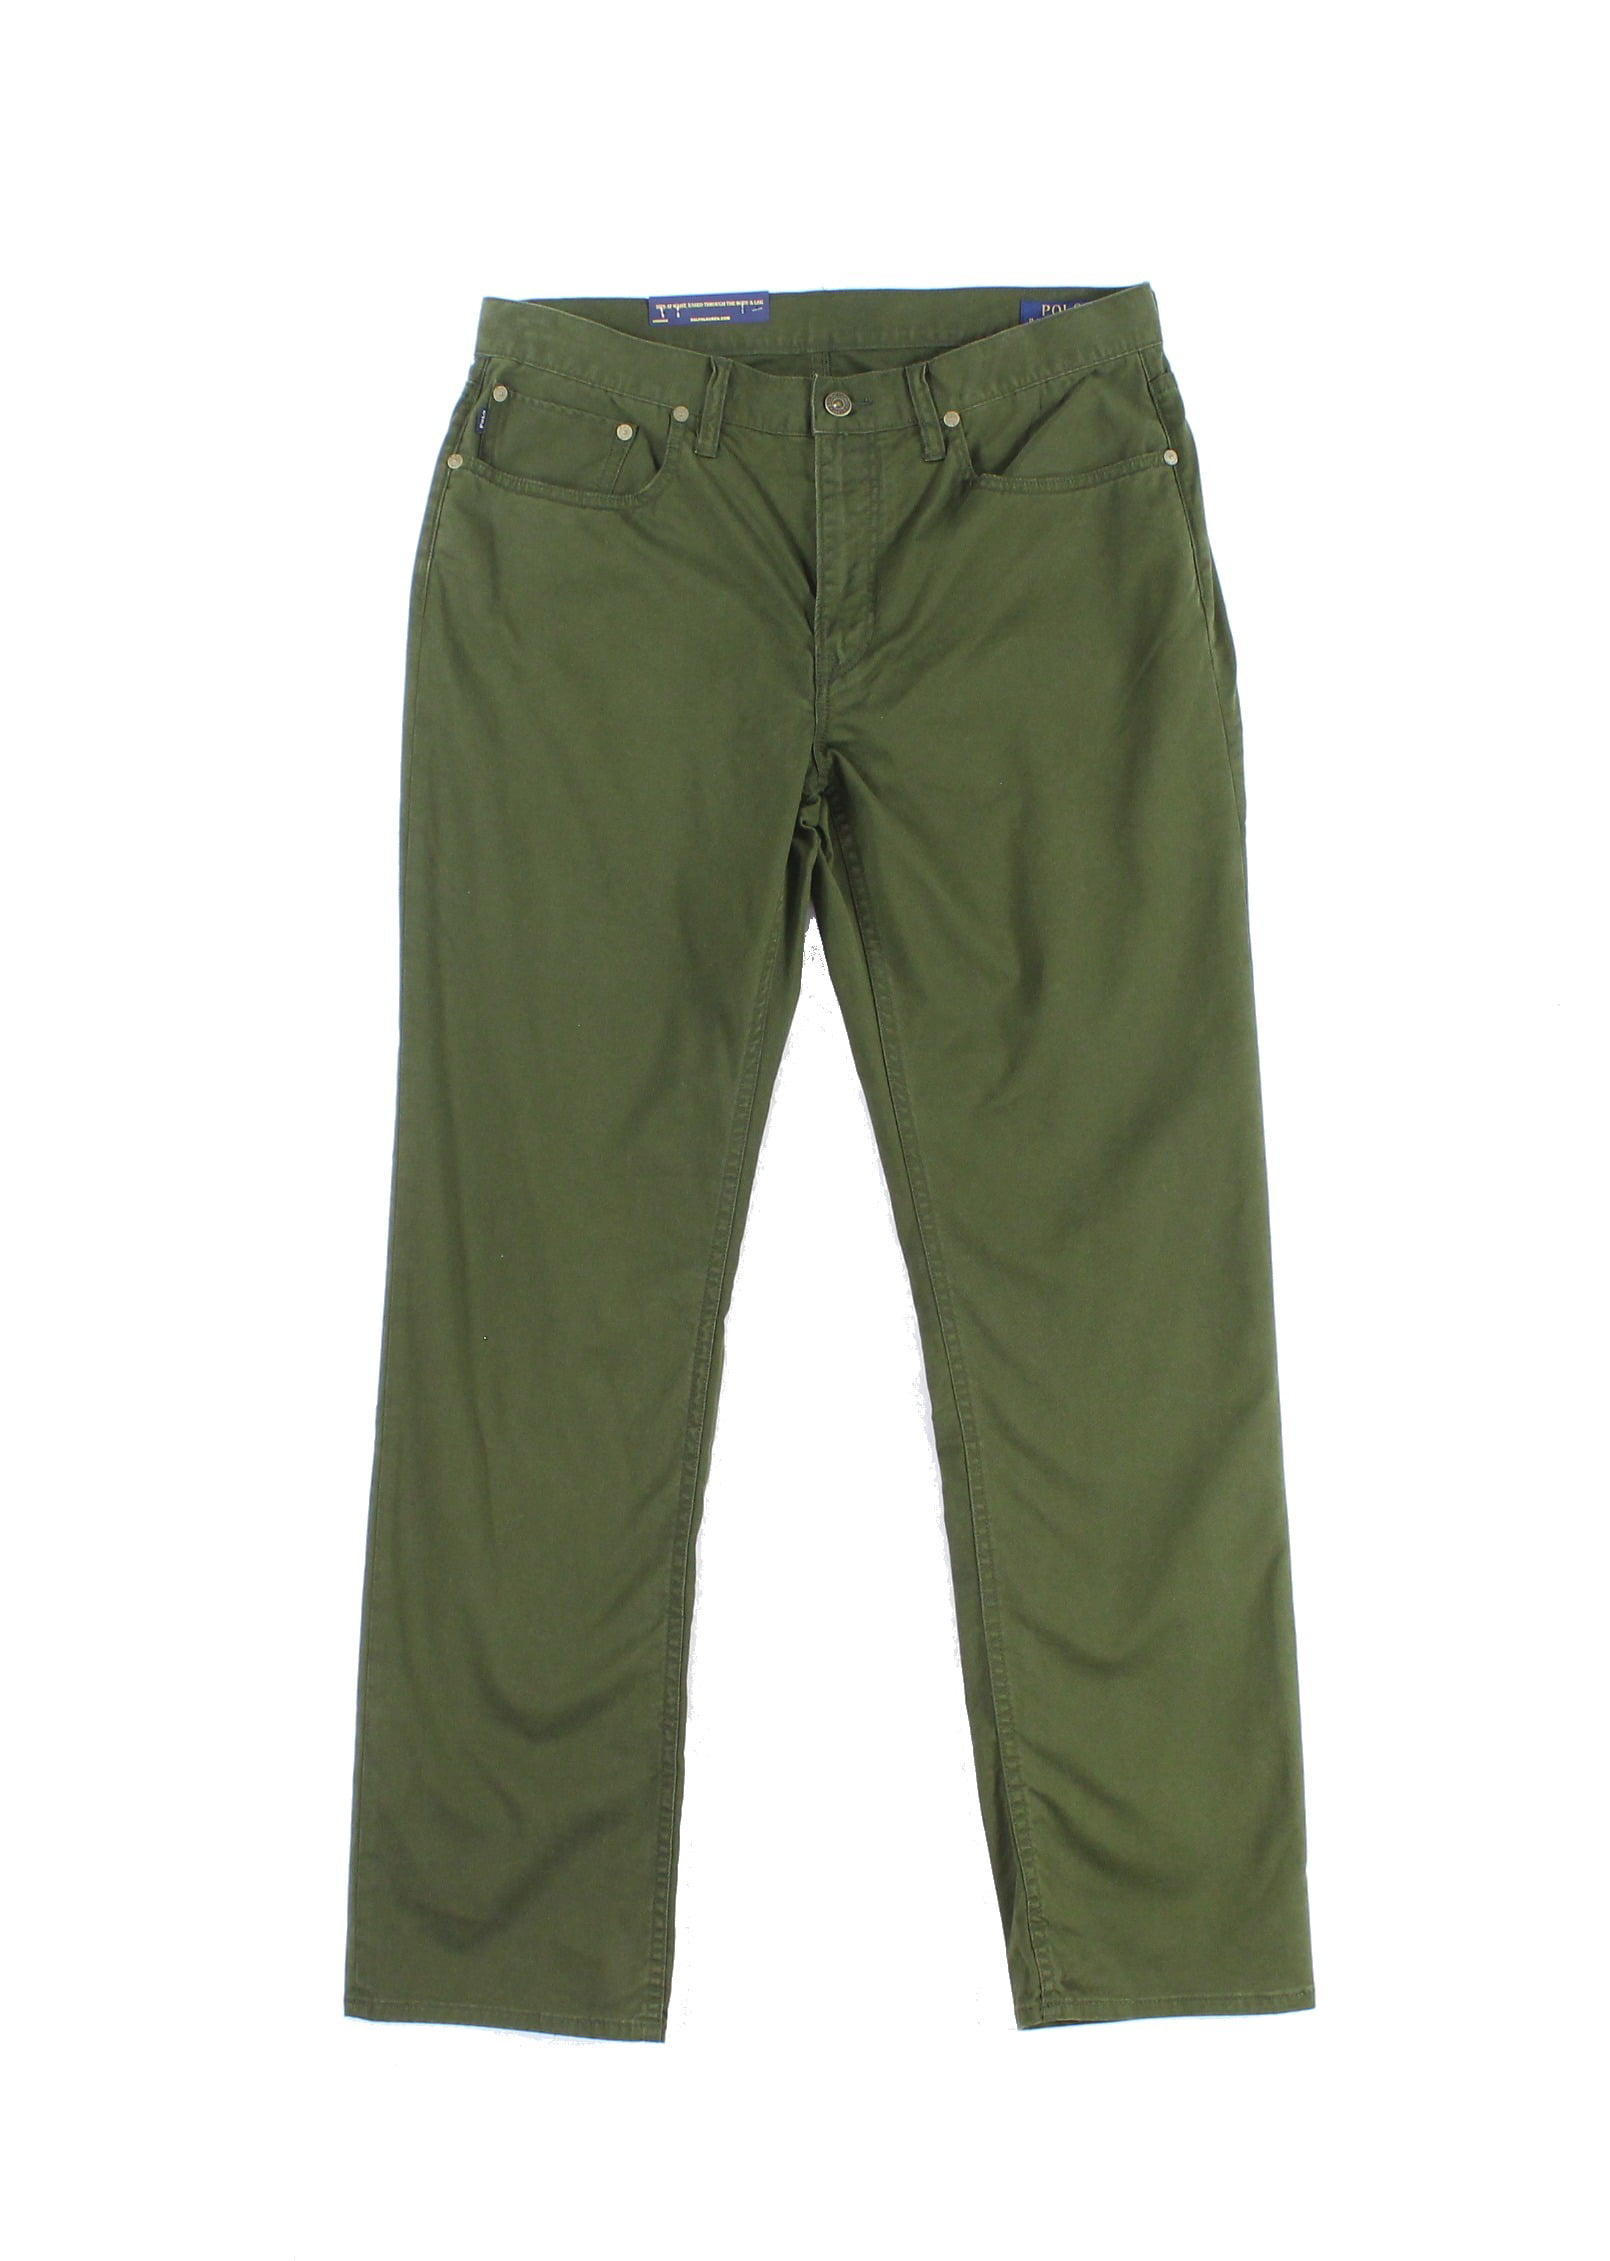 Polo Ralph Lauren NEW Green Mens Size 33x30 Straight-Fit Pants Stretch ...